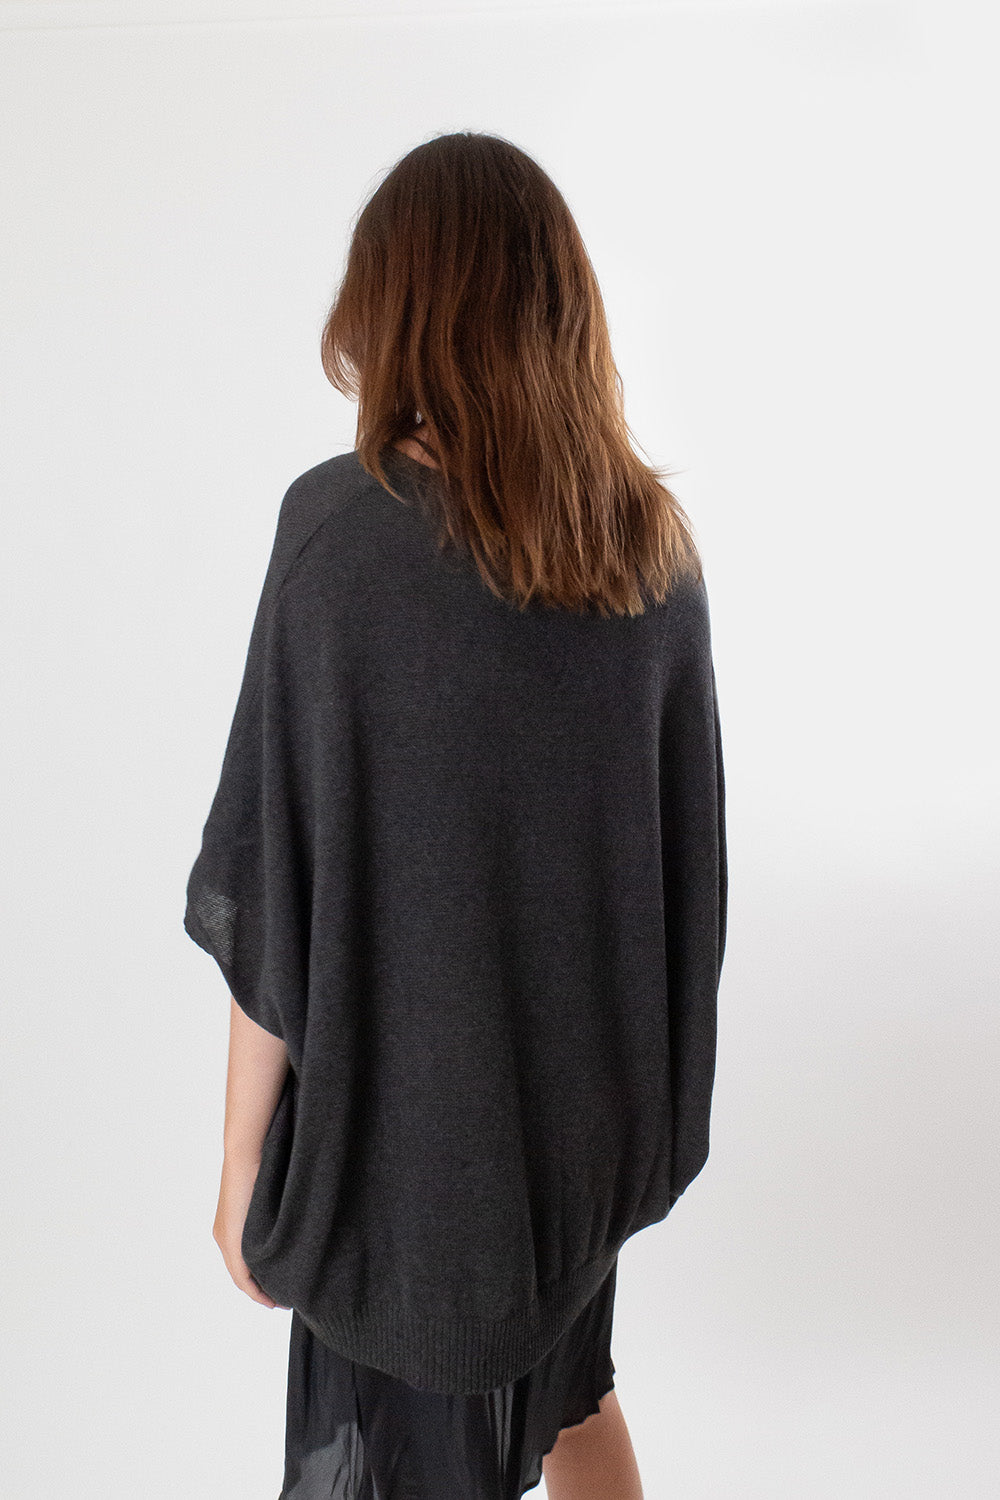 Pima Cotton V Neck Cocoon Sweater in Charcoal